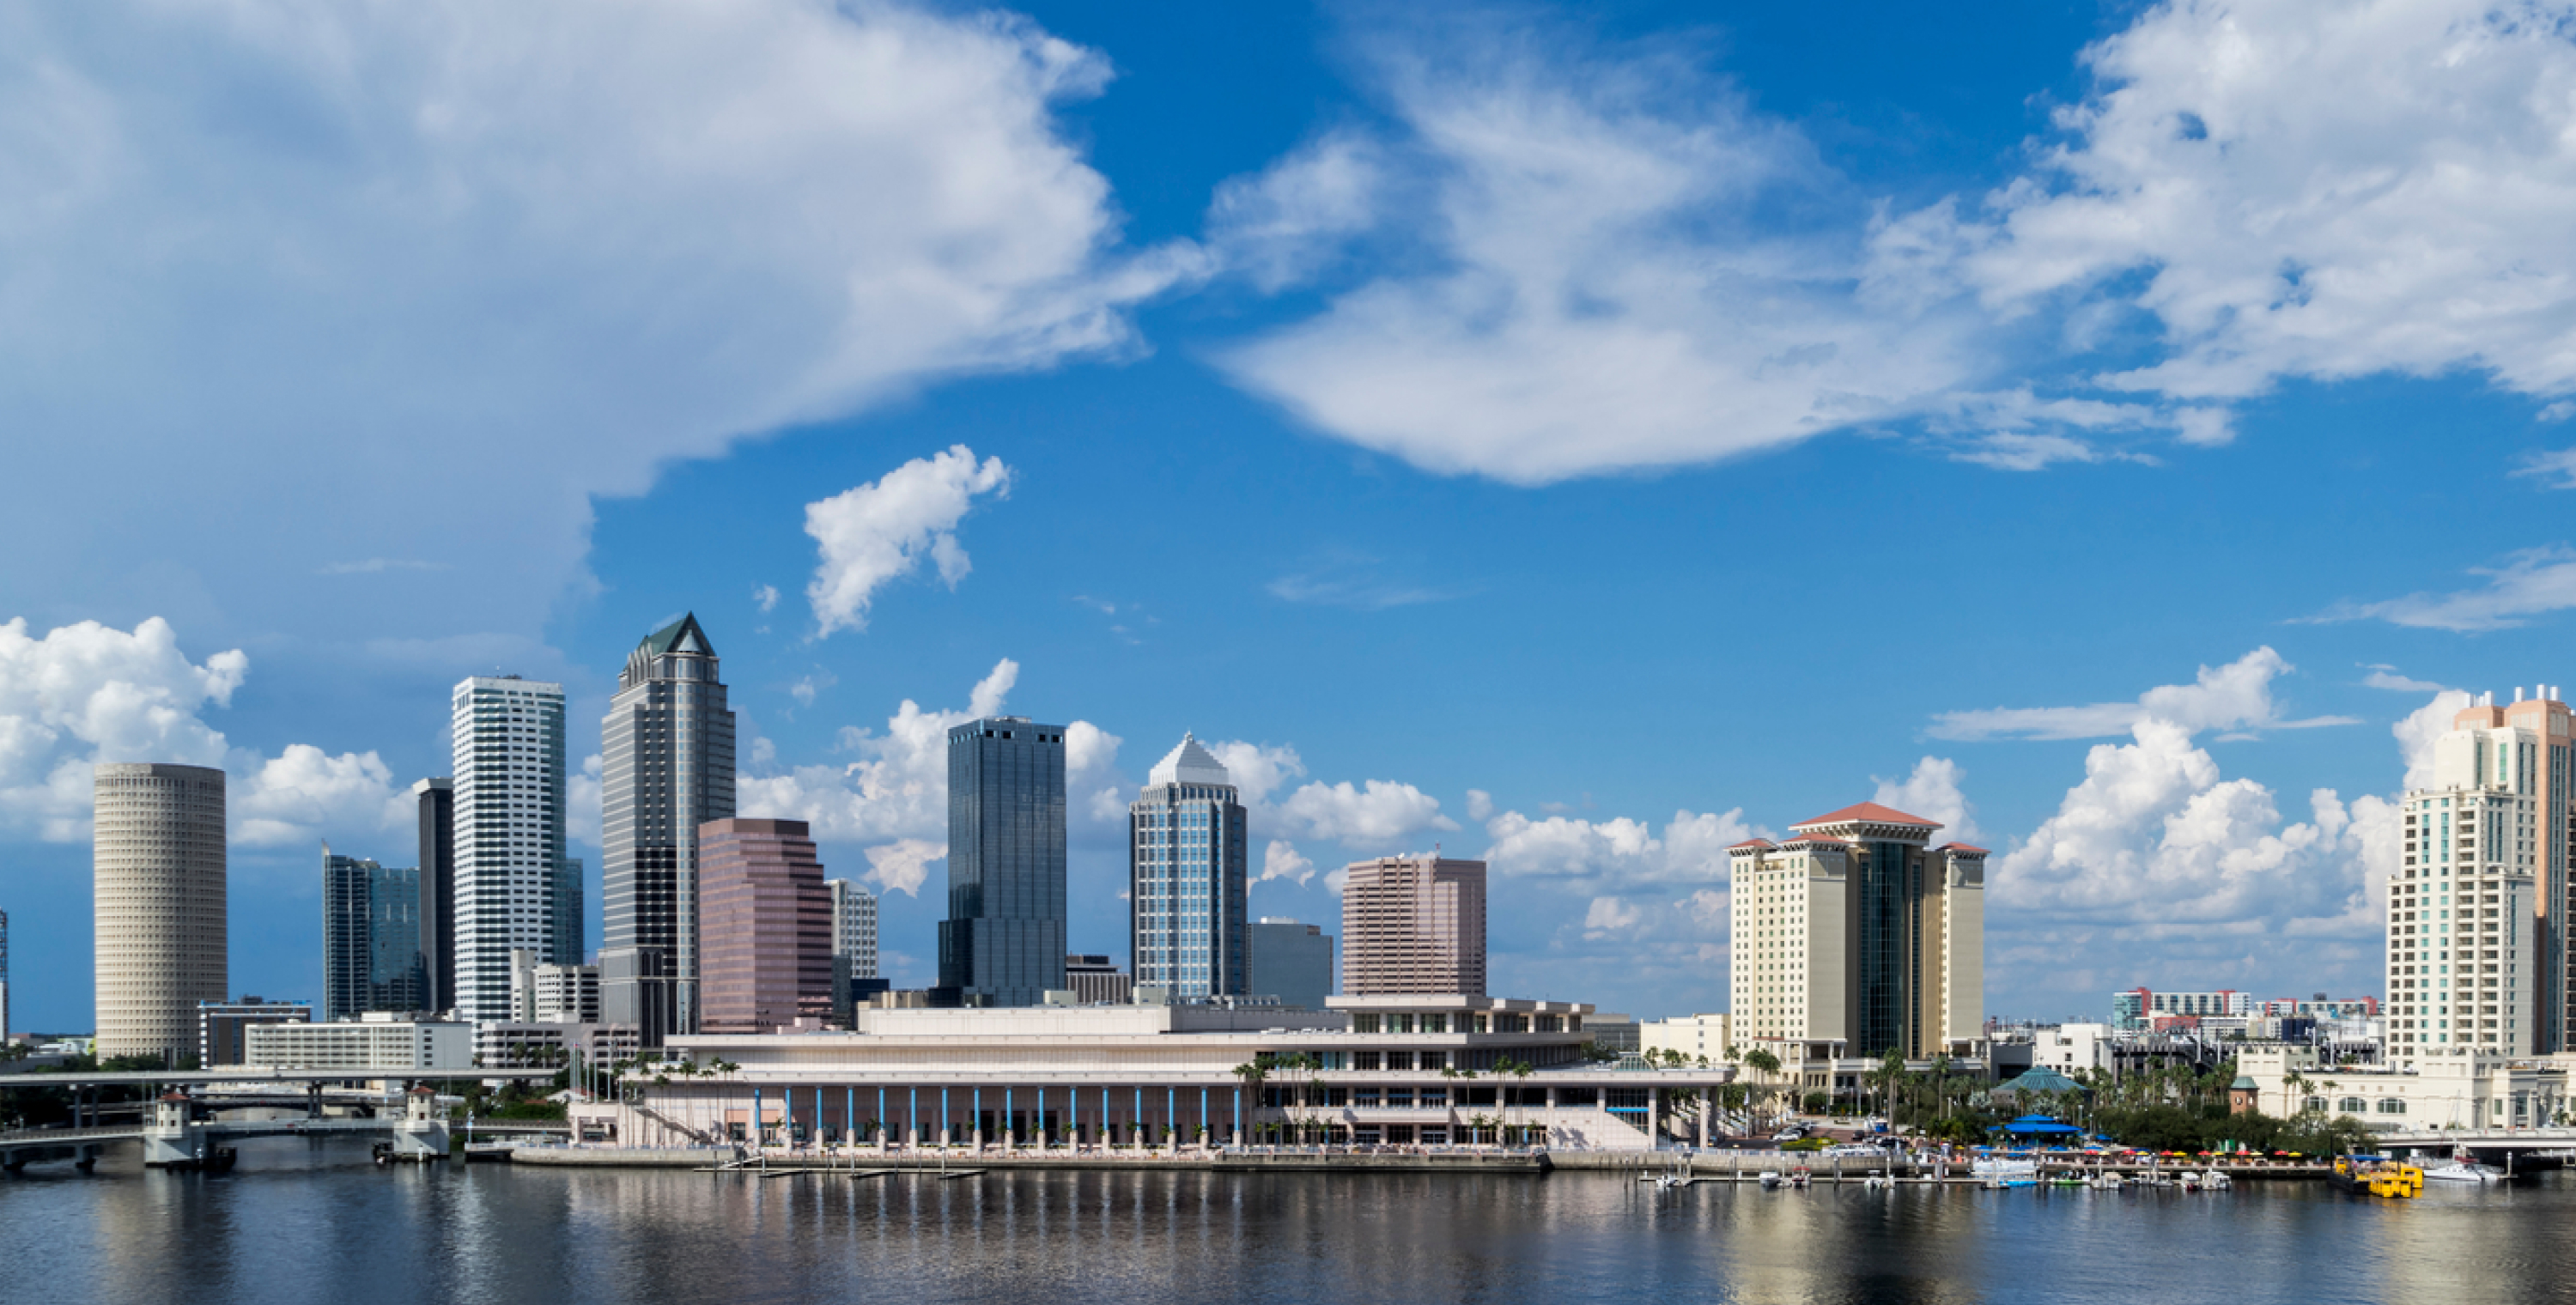 A photo of the city of Tampa with a blue sky and blue ocean